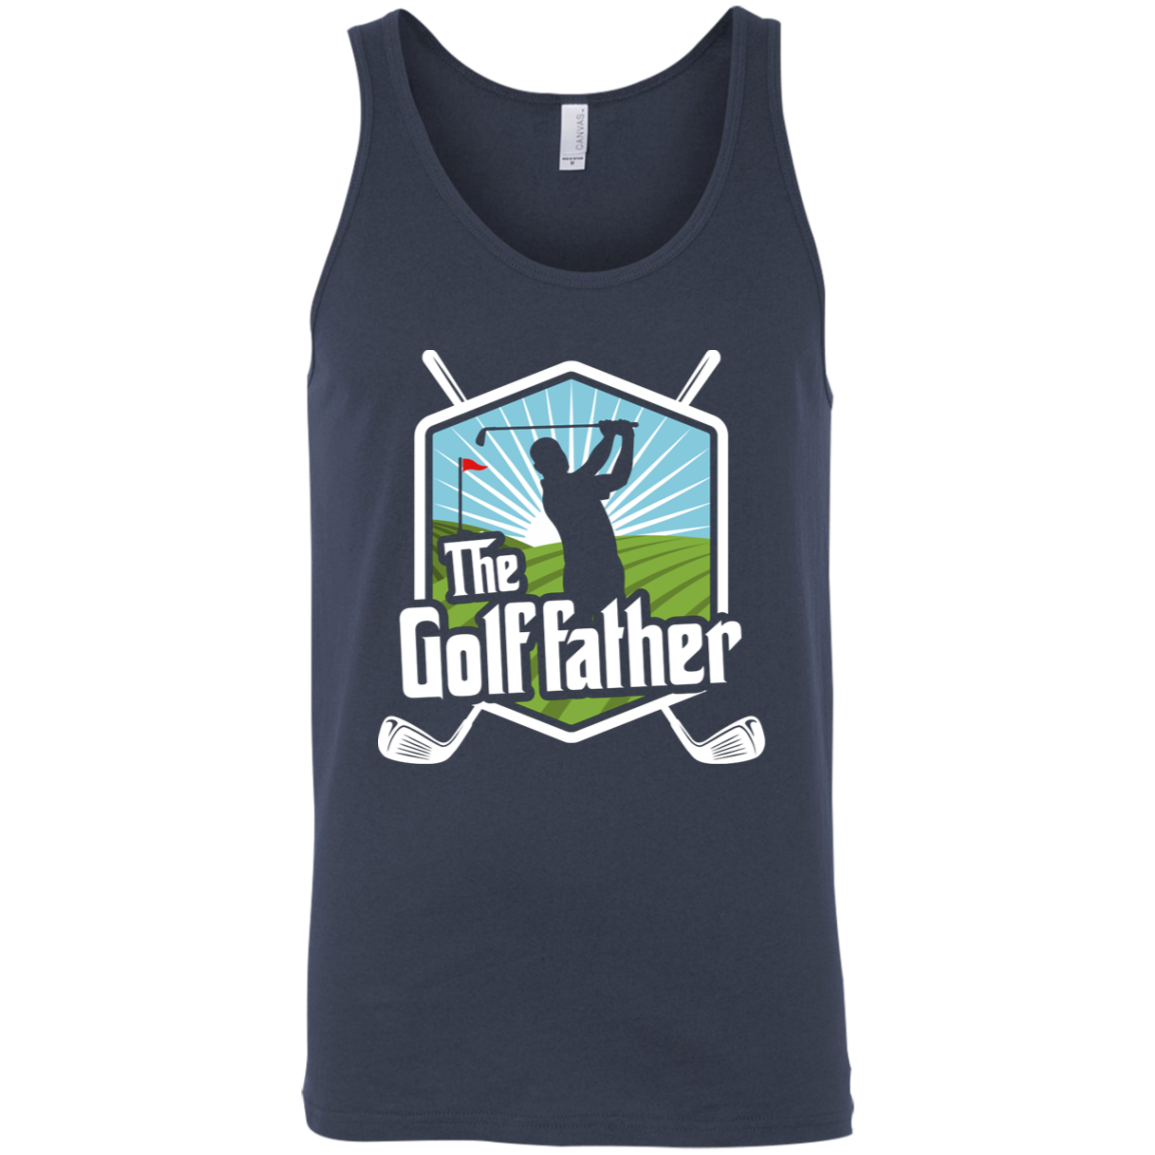 The Golf Father Tank Top Apparel - The Beer Lodge